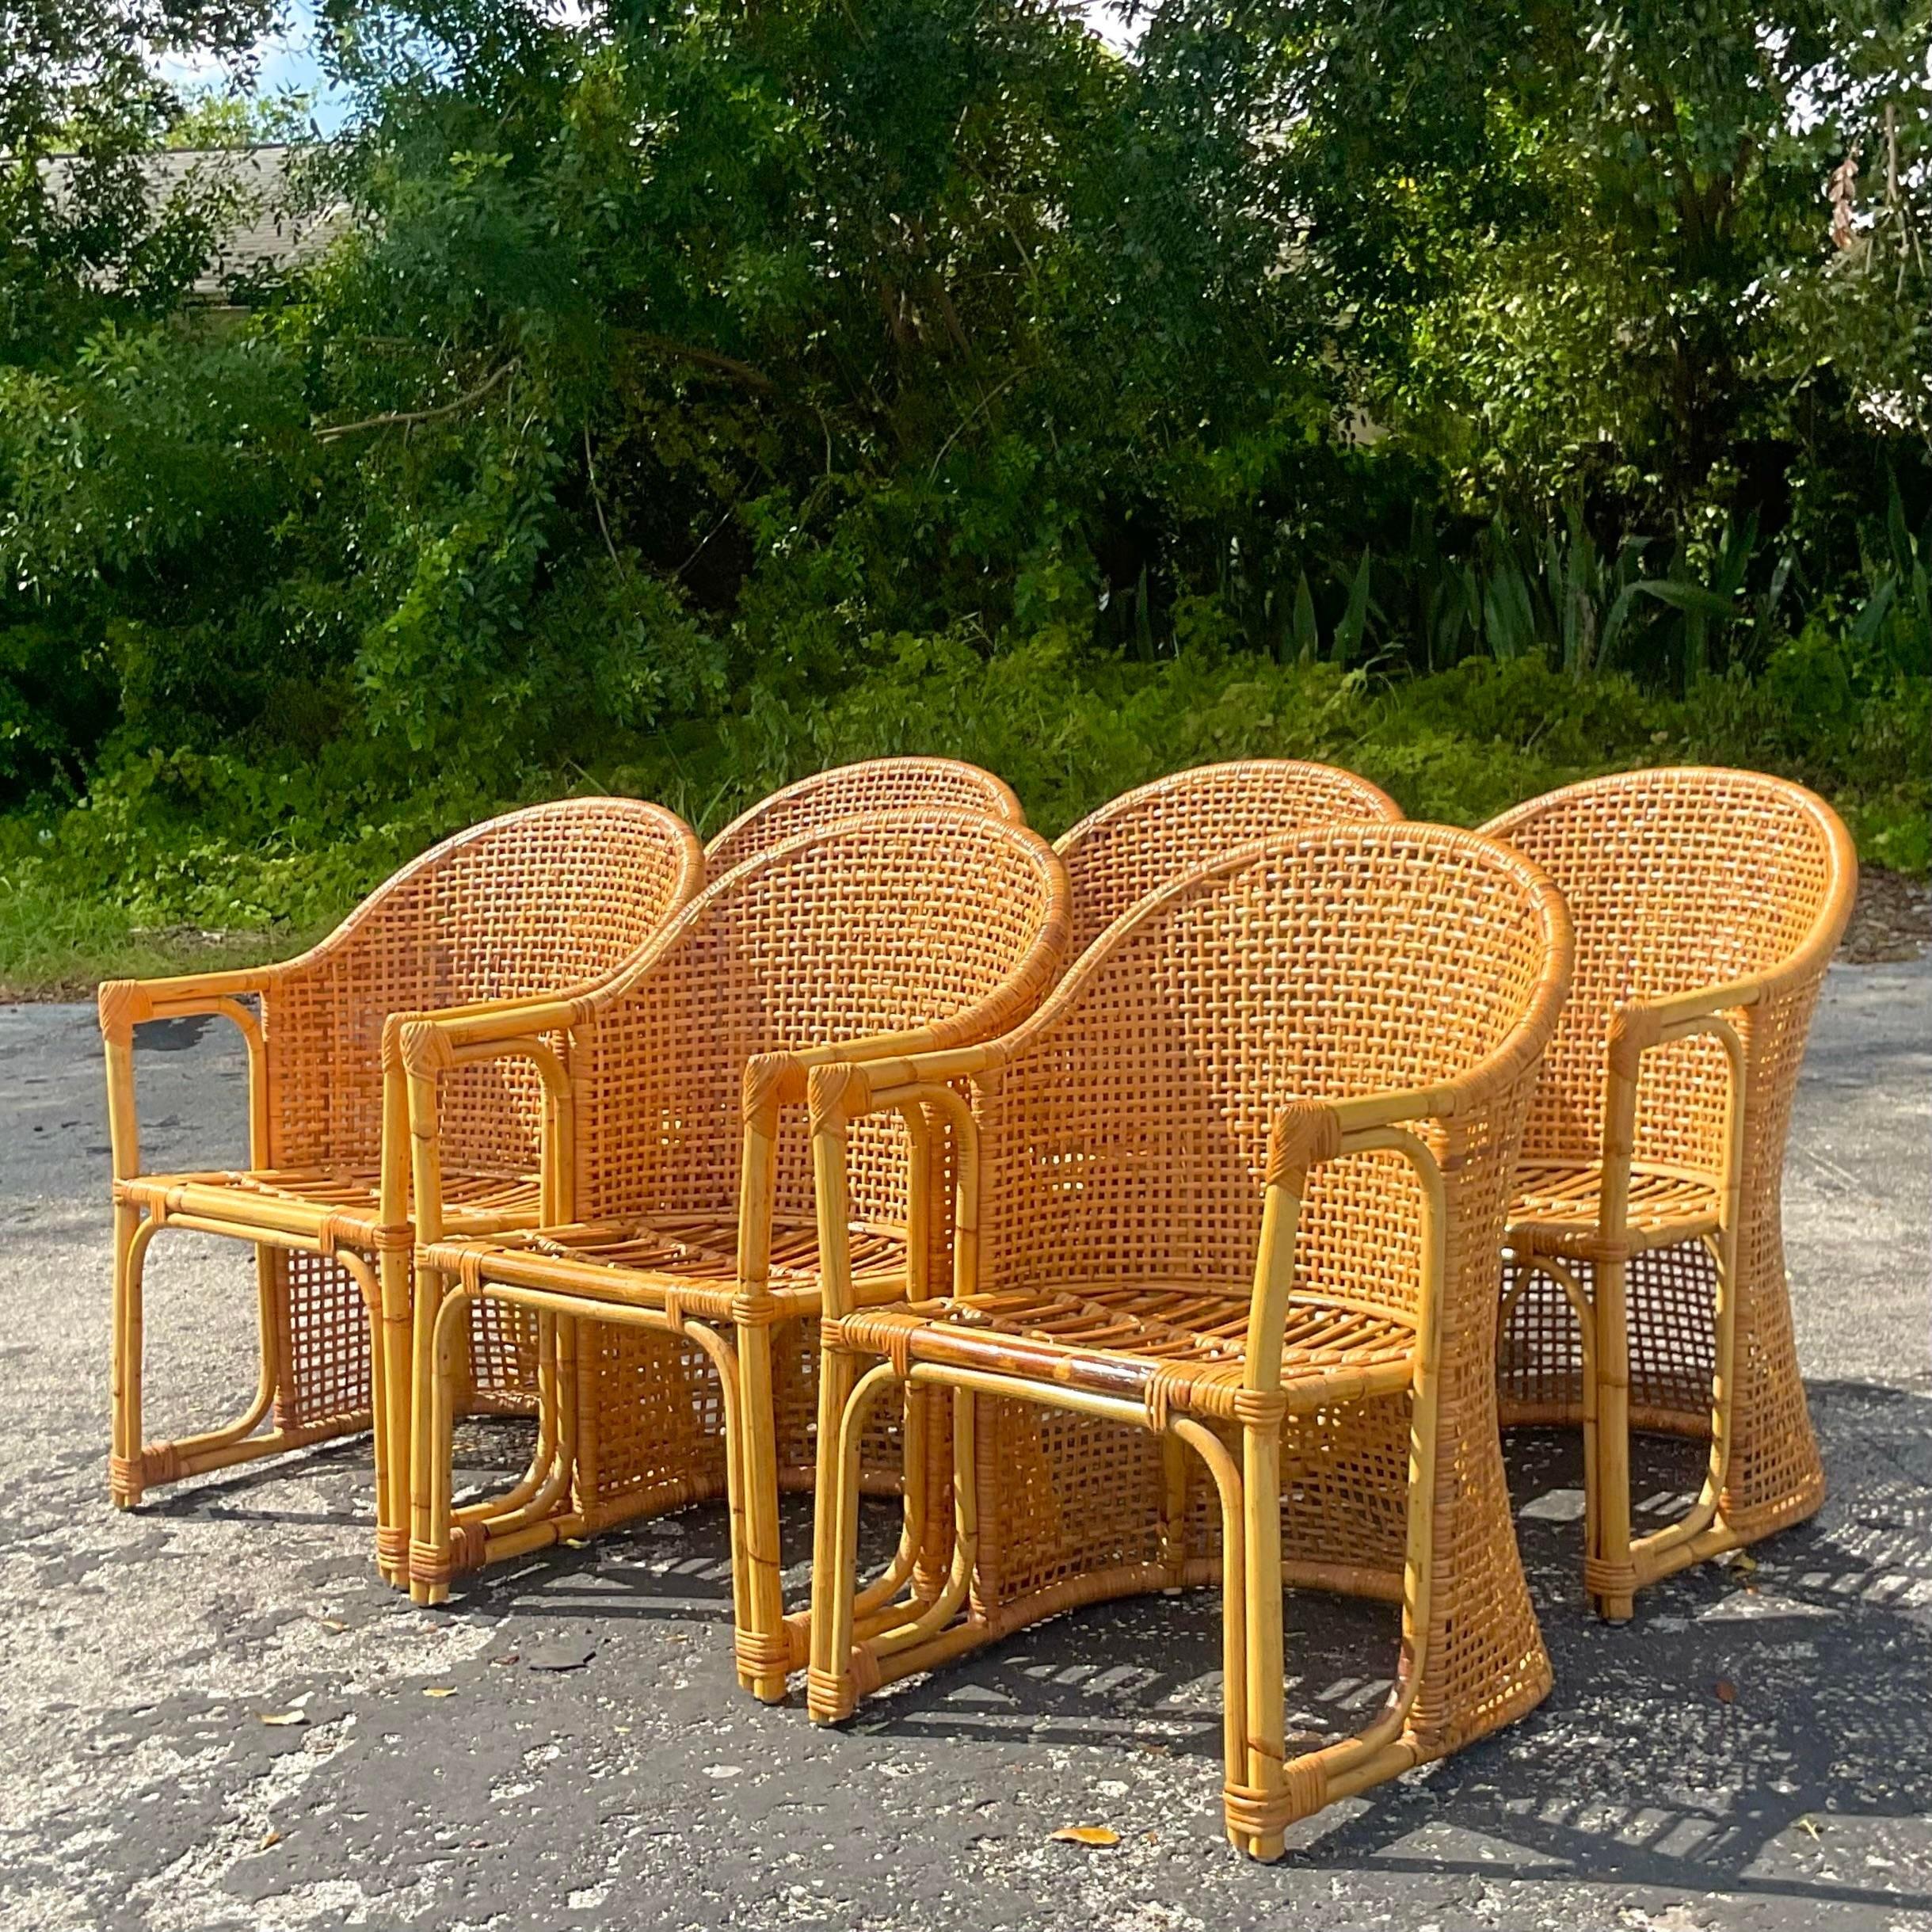 A fantastic set of six vintage Coastal dining chairs. A chic woven rattan frame with a wrap around barrel back. In excellent condition and a beautiful patina from time. Acquired from a Palm Beach estate.